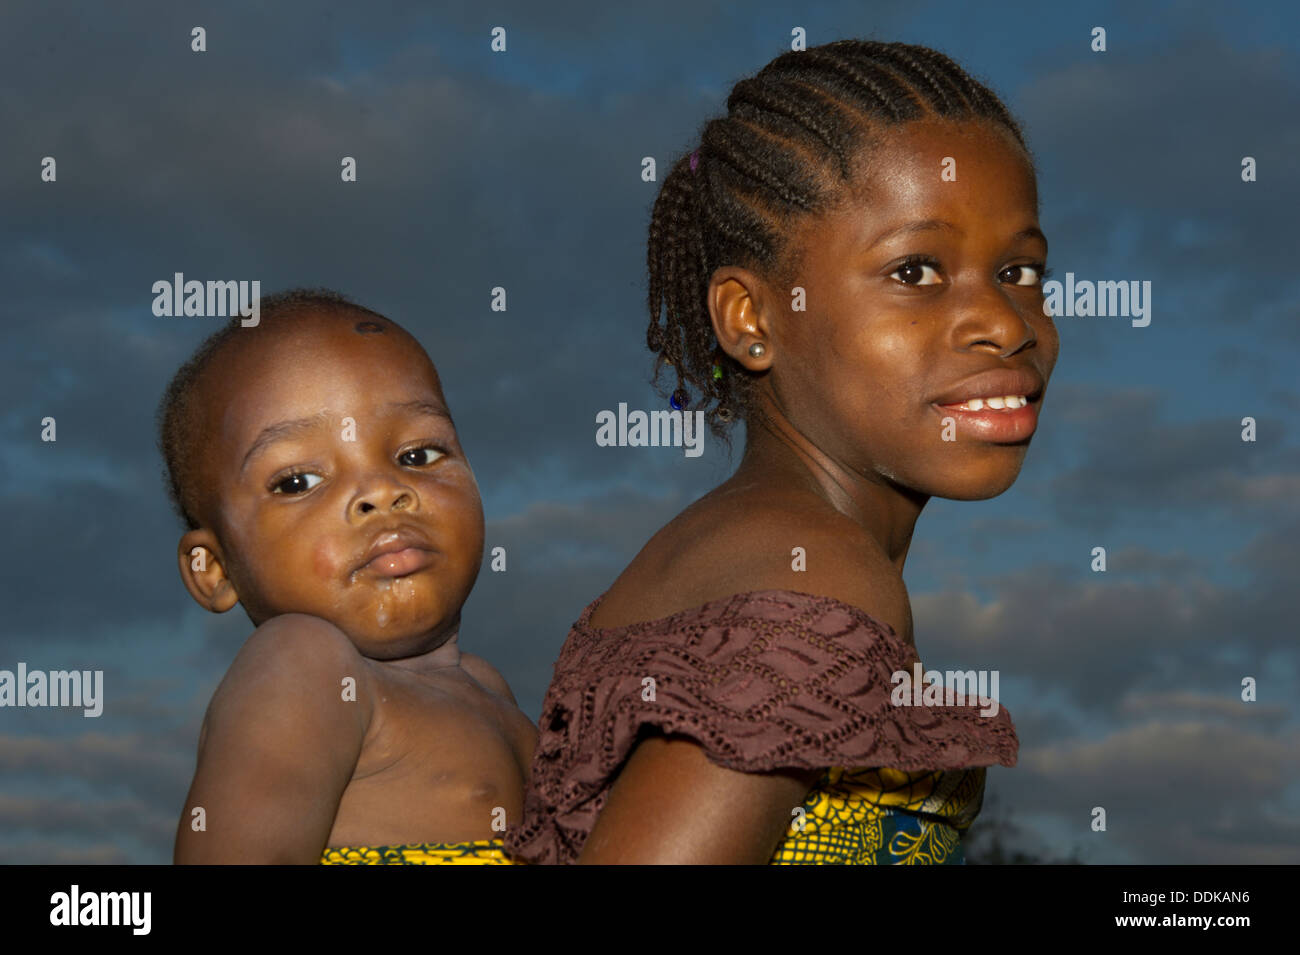 A teenager back carrying a toddler in Nigeria Stock Photo